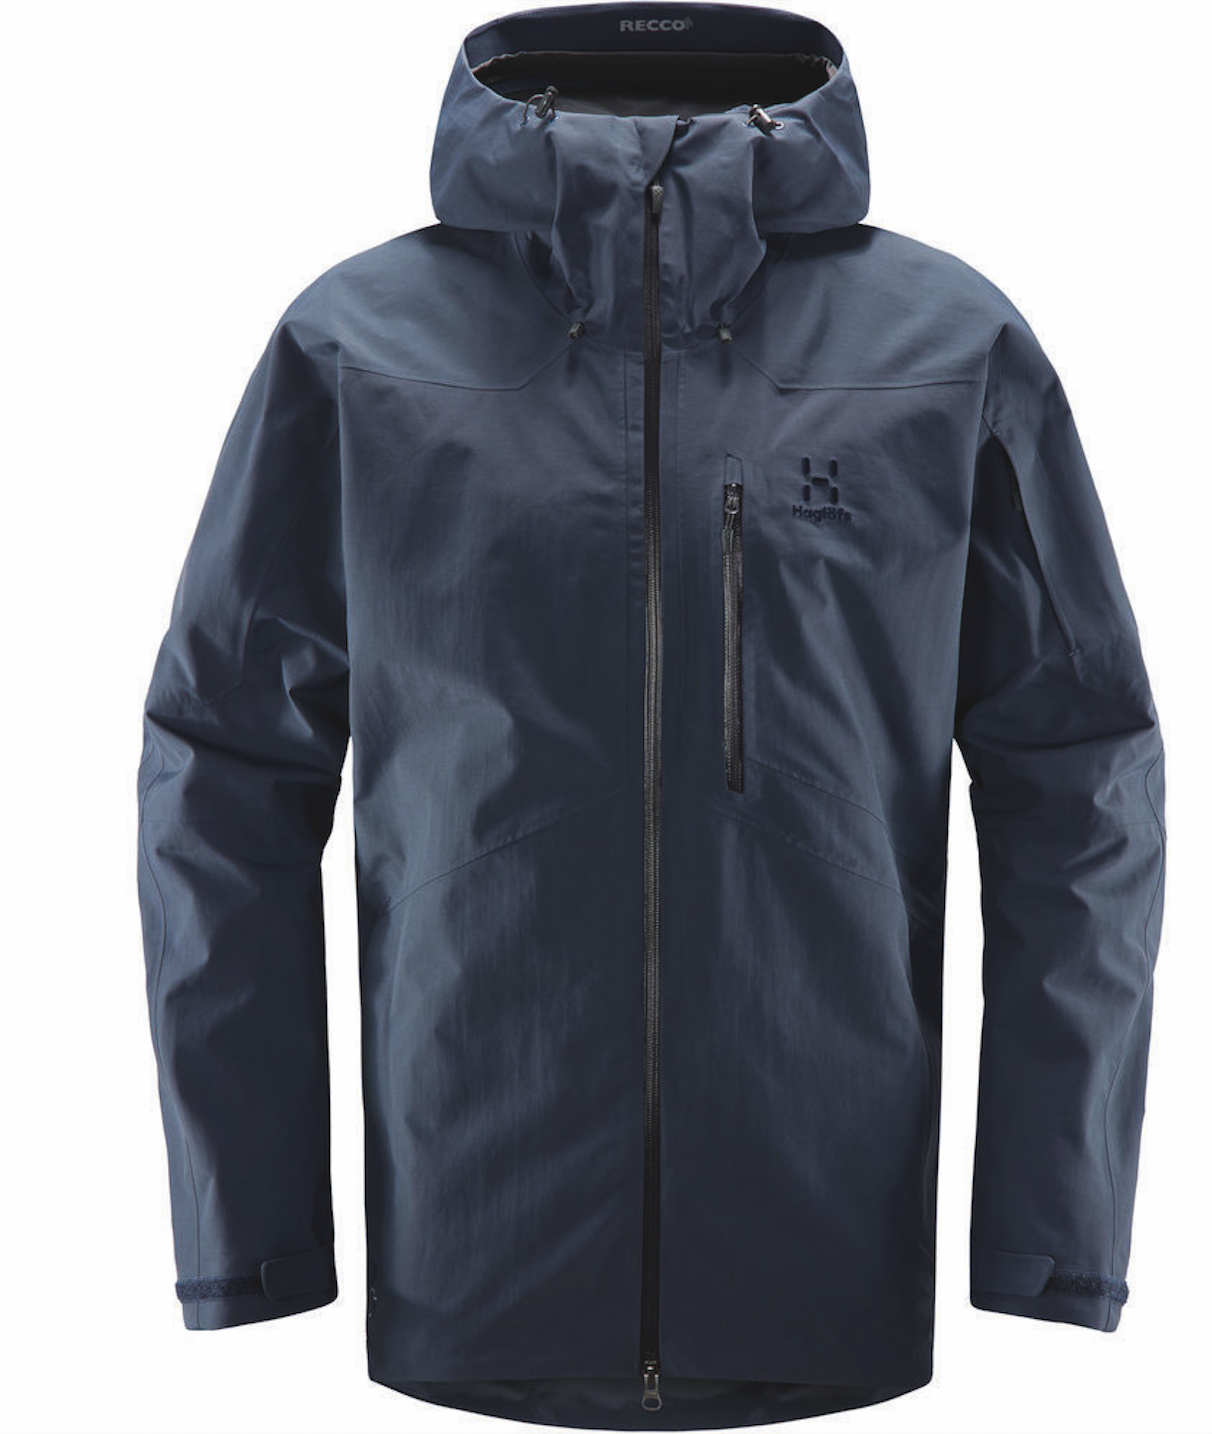 seven best ski jackets to hit the slopes in style Men's Fitness UK